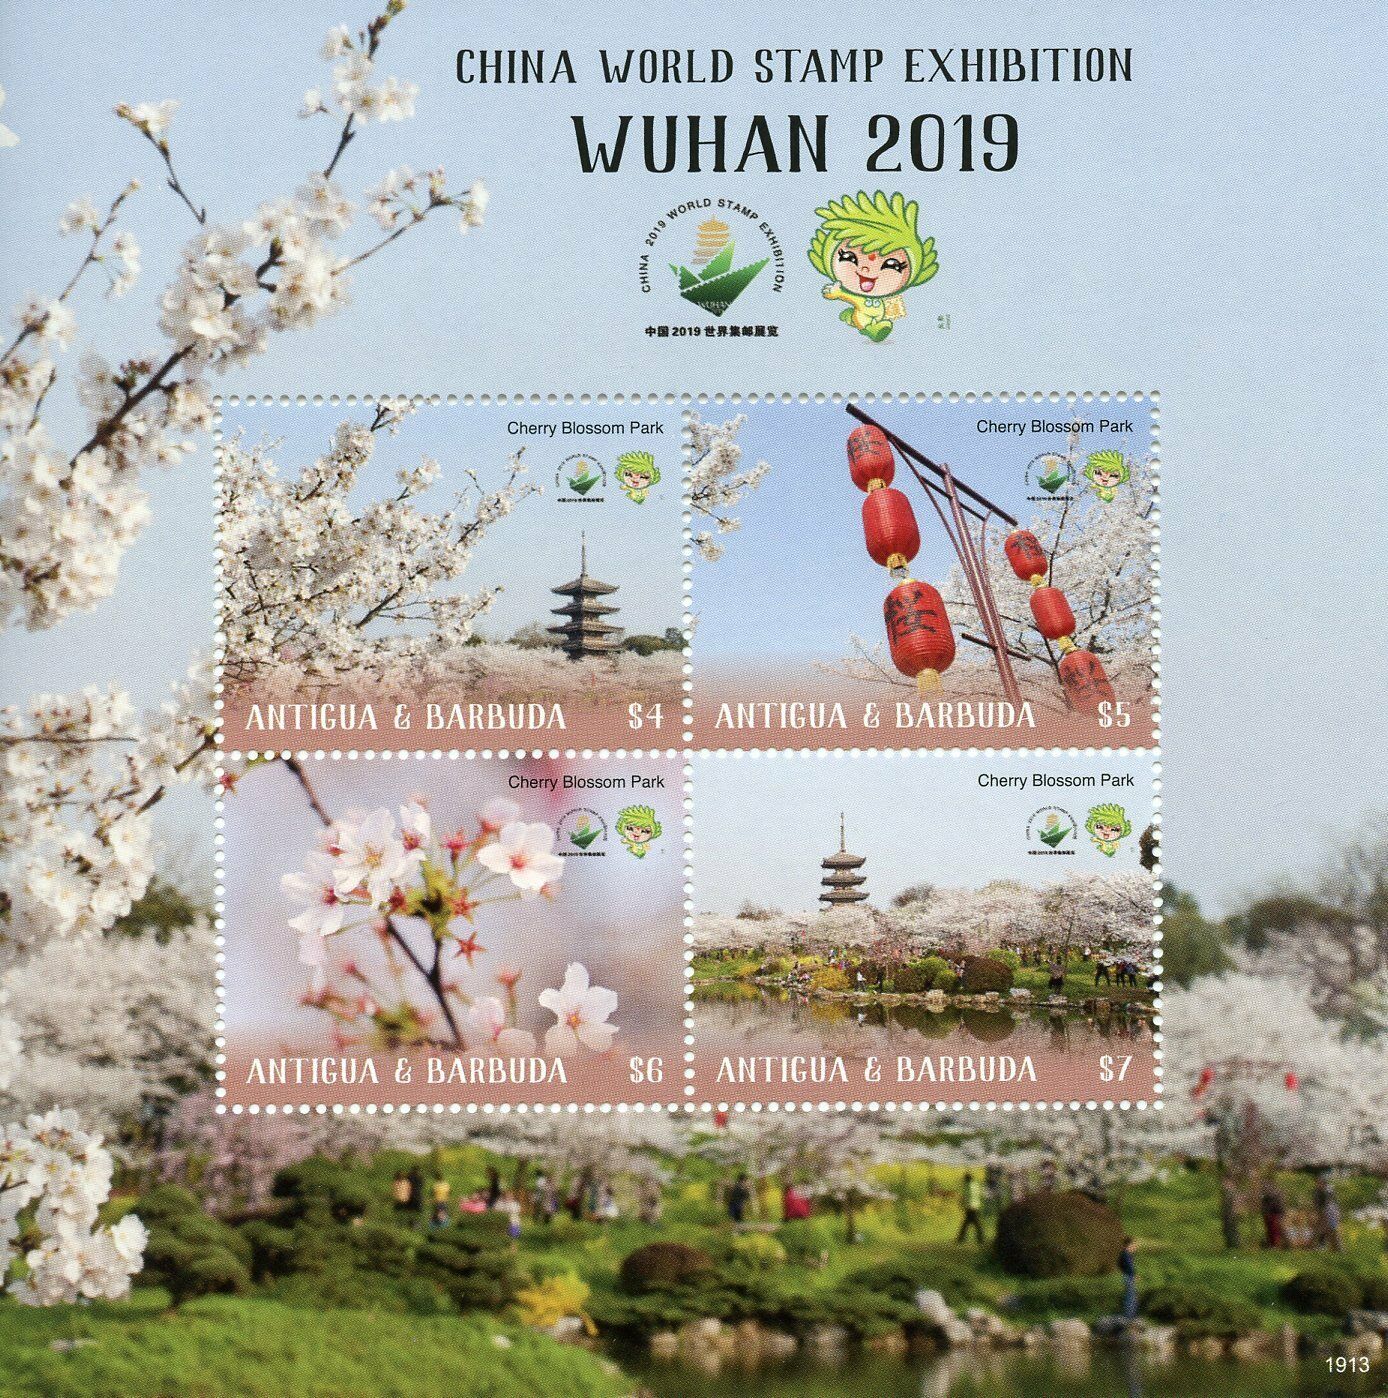 Antigua & Barbuda 2019 MNH Flowers Stamps Wuhan China World Exhibition 4v M/S